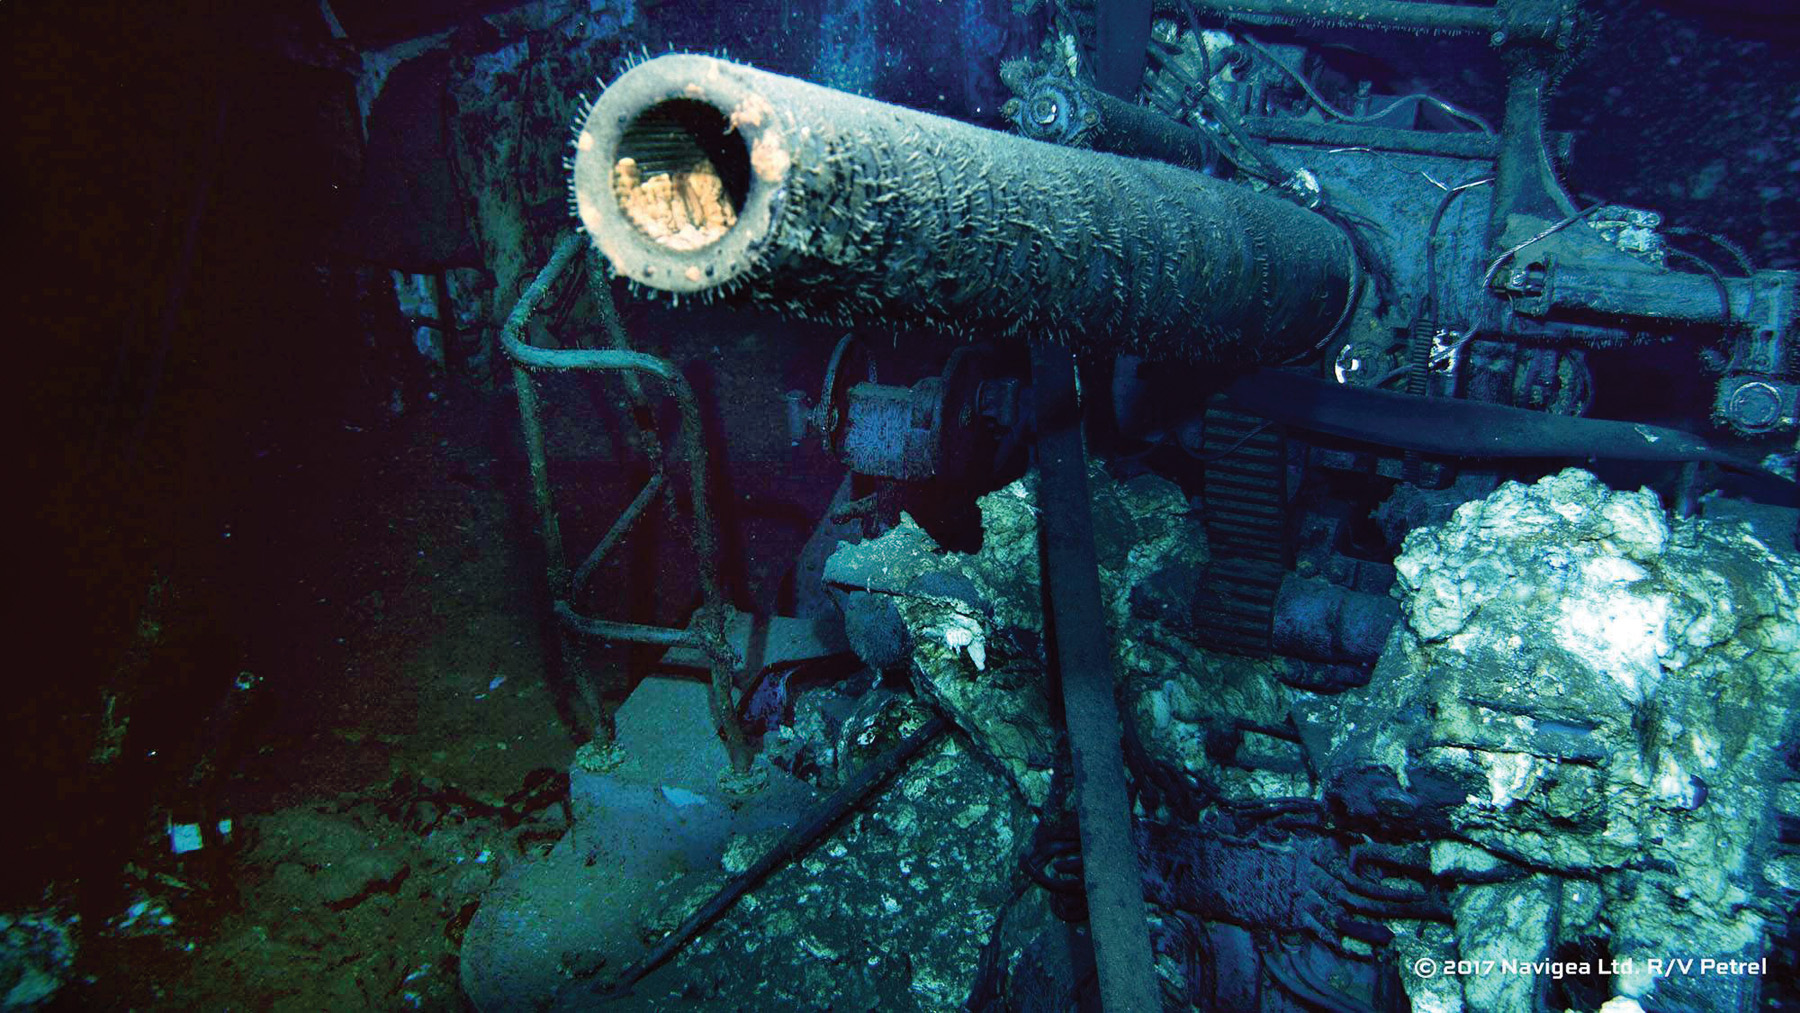 One of the Indianapolis’s antiaircraft deck guns. This photo was taken after the shipwreck was located  in August 2017 by an expedition financed by Paul G. Allen.